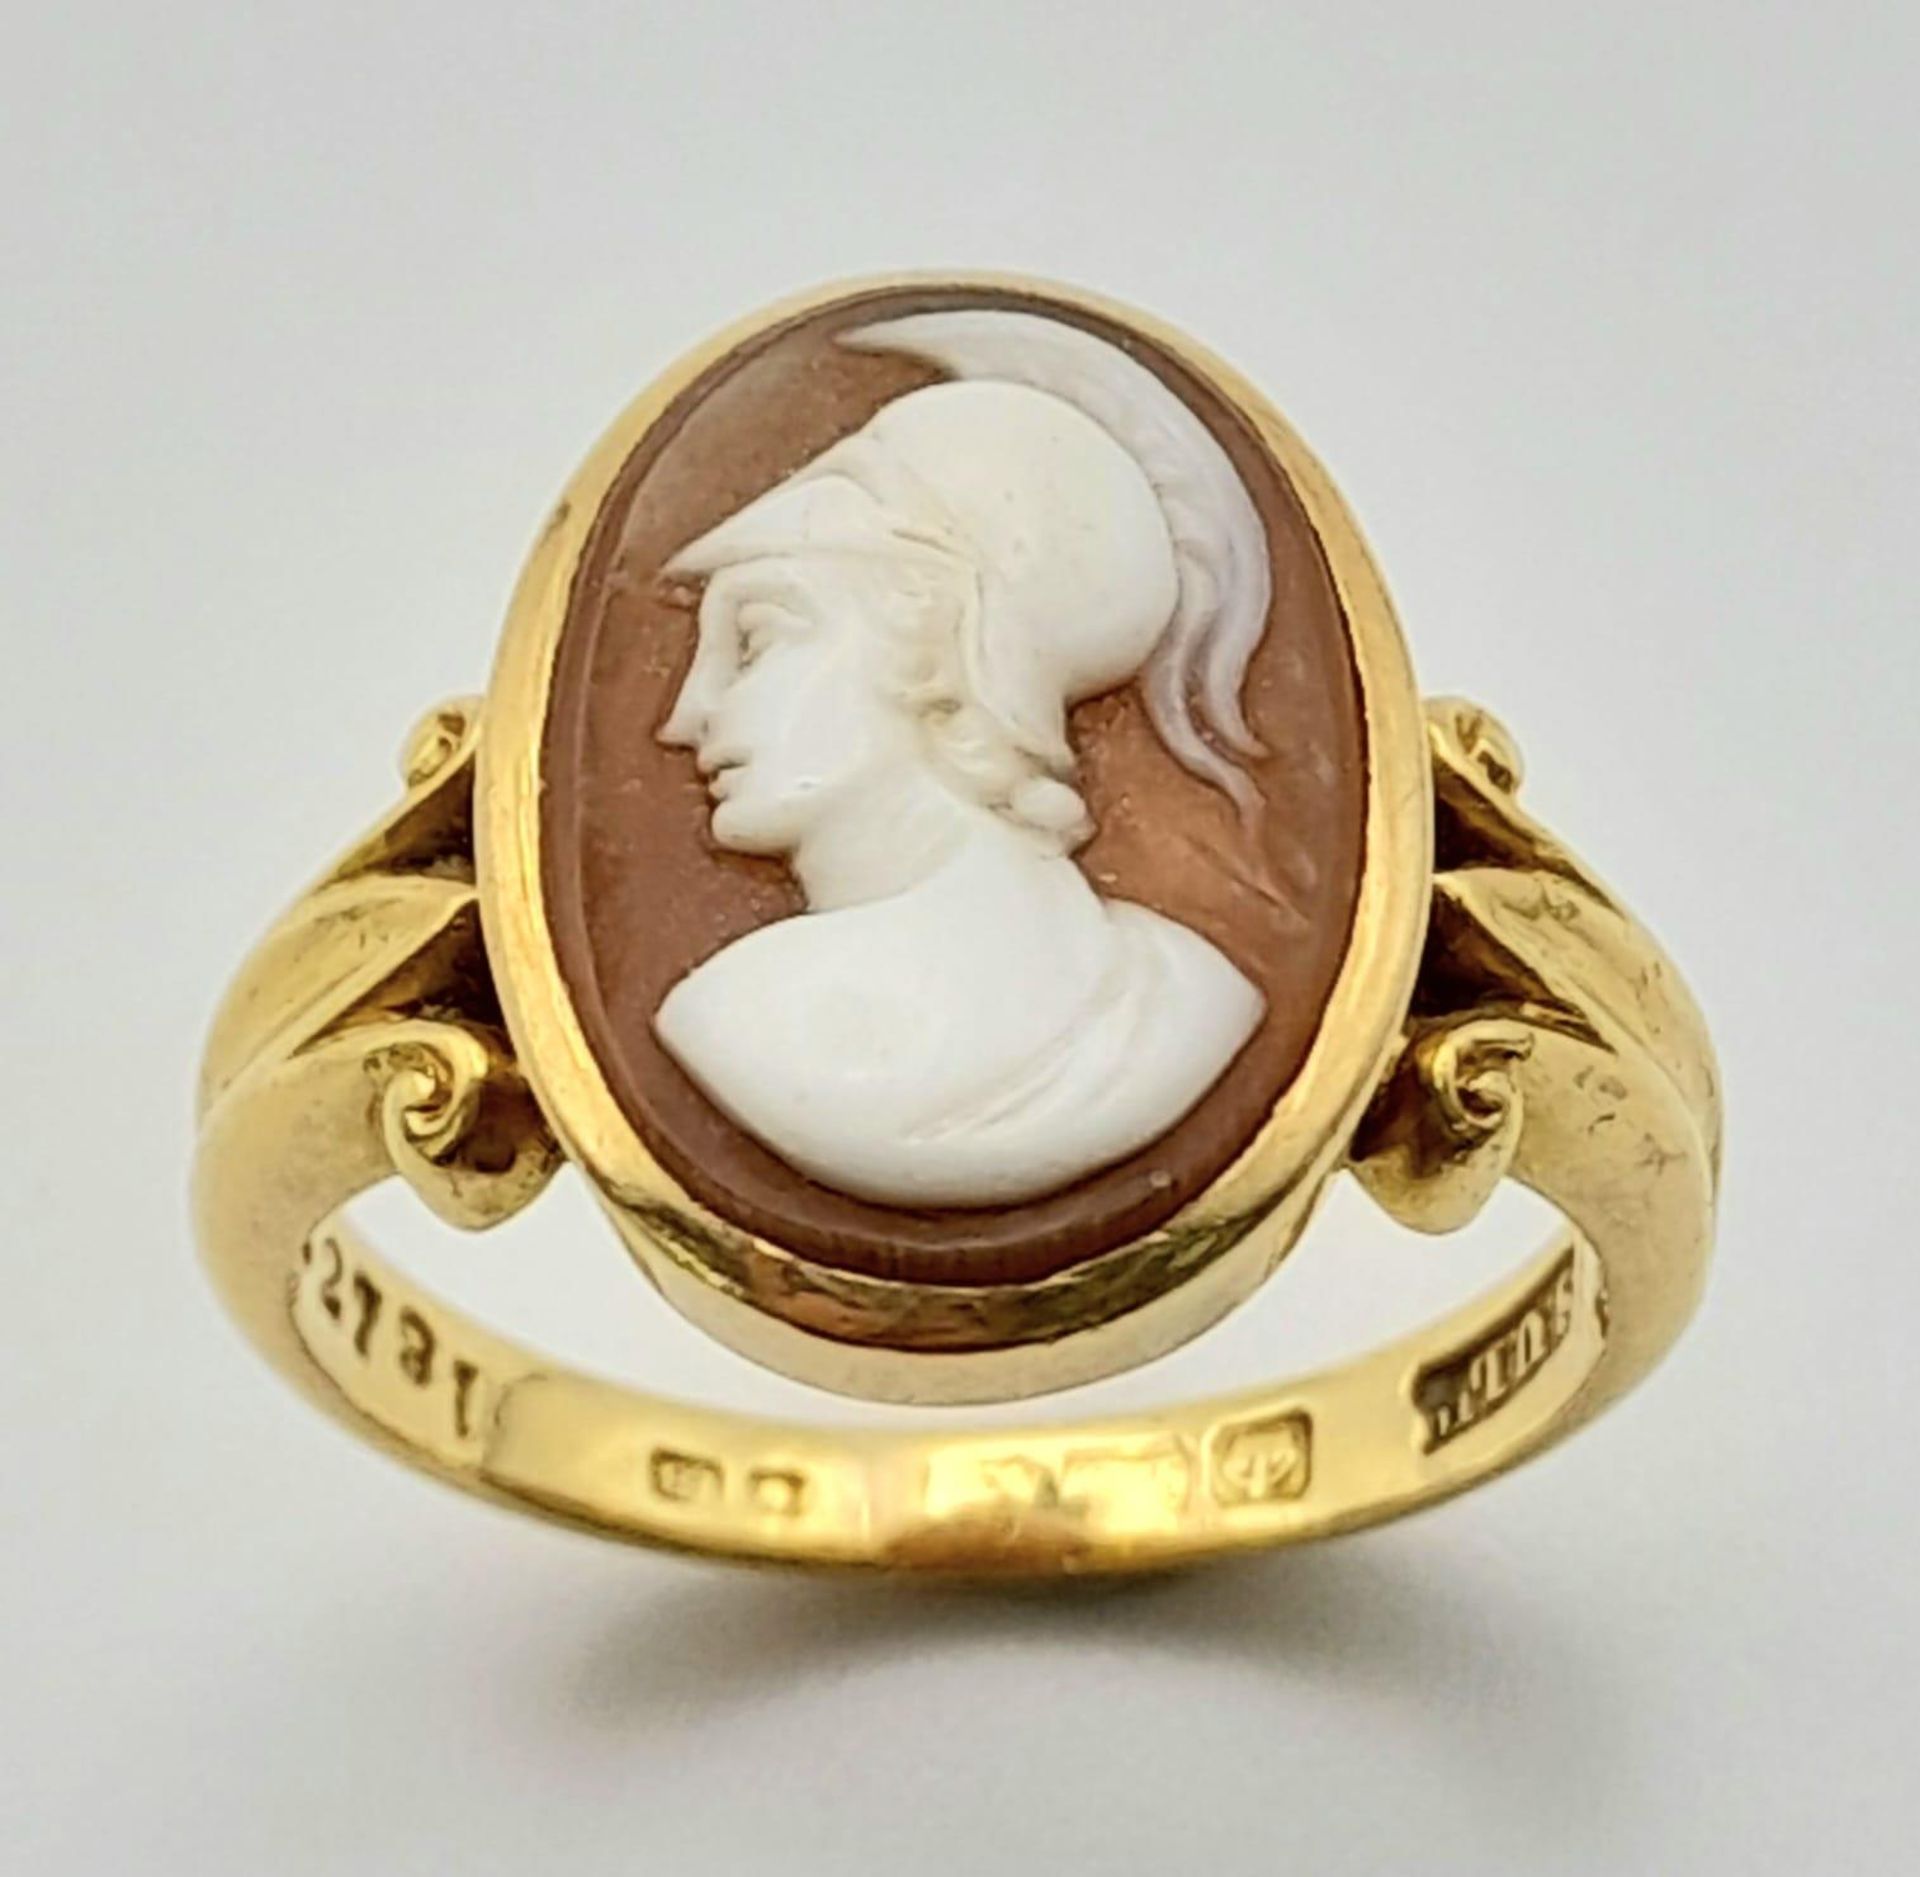 A Vintage 18K Yellow Gold Cameo Ring. Size N. 5.4g total weight.